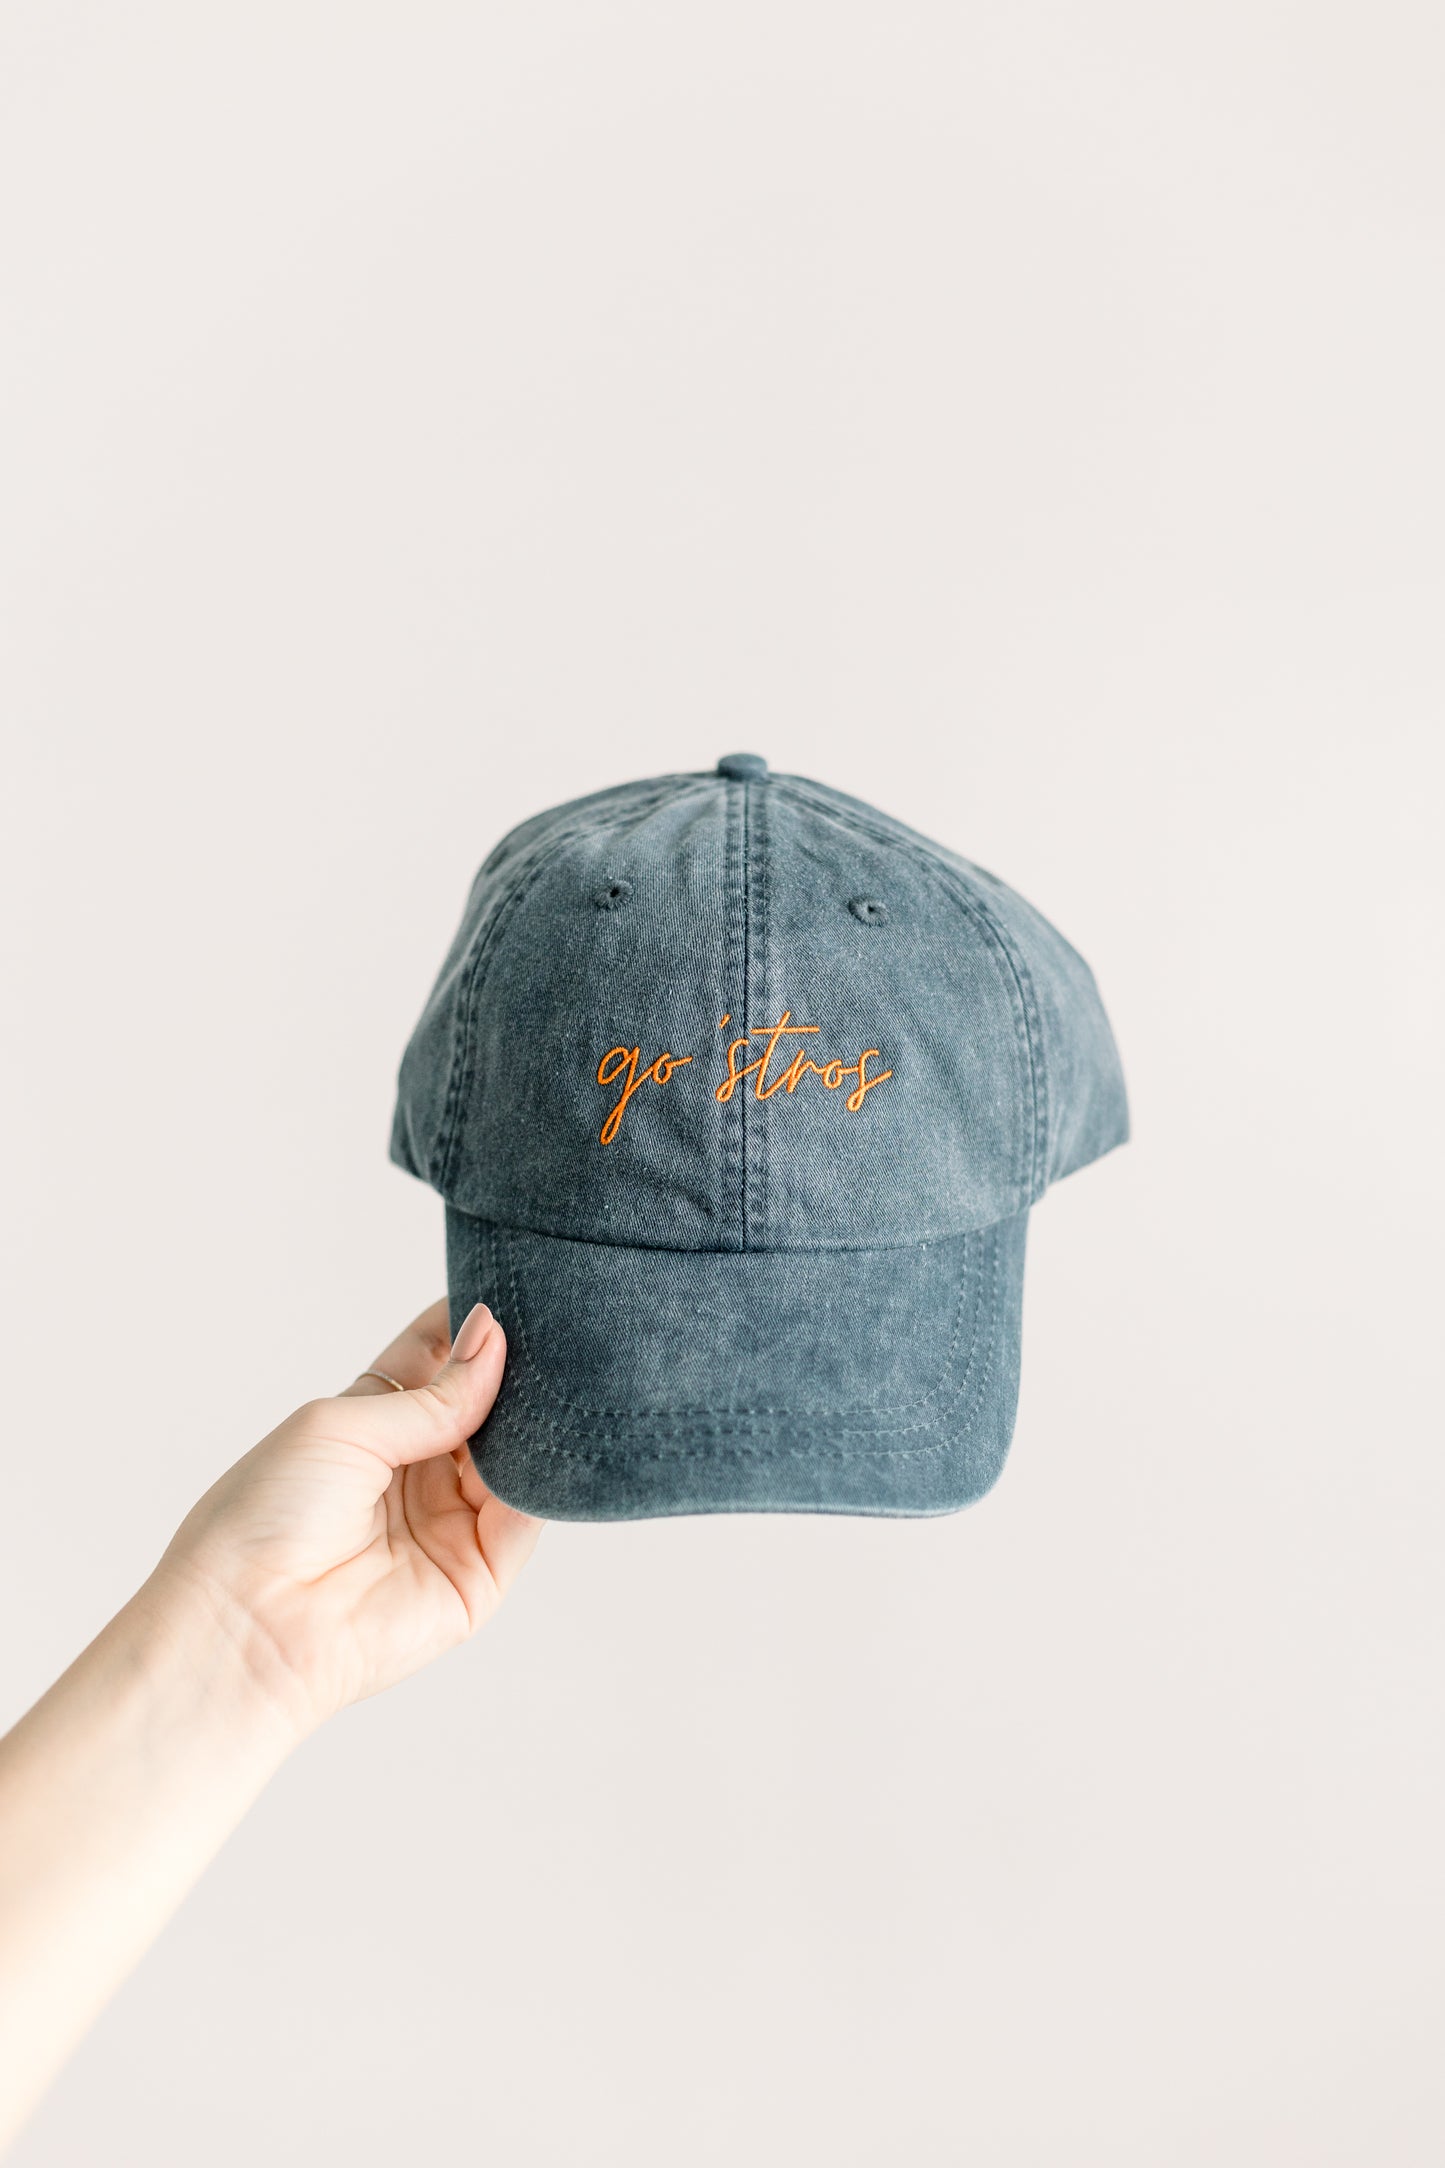 Go 'Stros Embroidered Pigment-Dyed Baseball Cap (MoonTime Font) - Adult Unisex